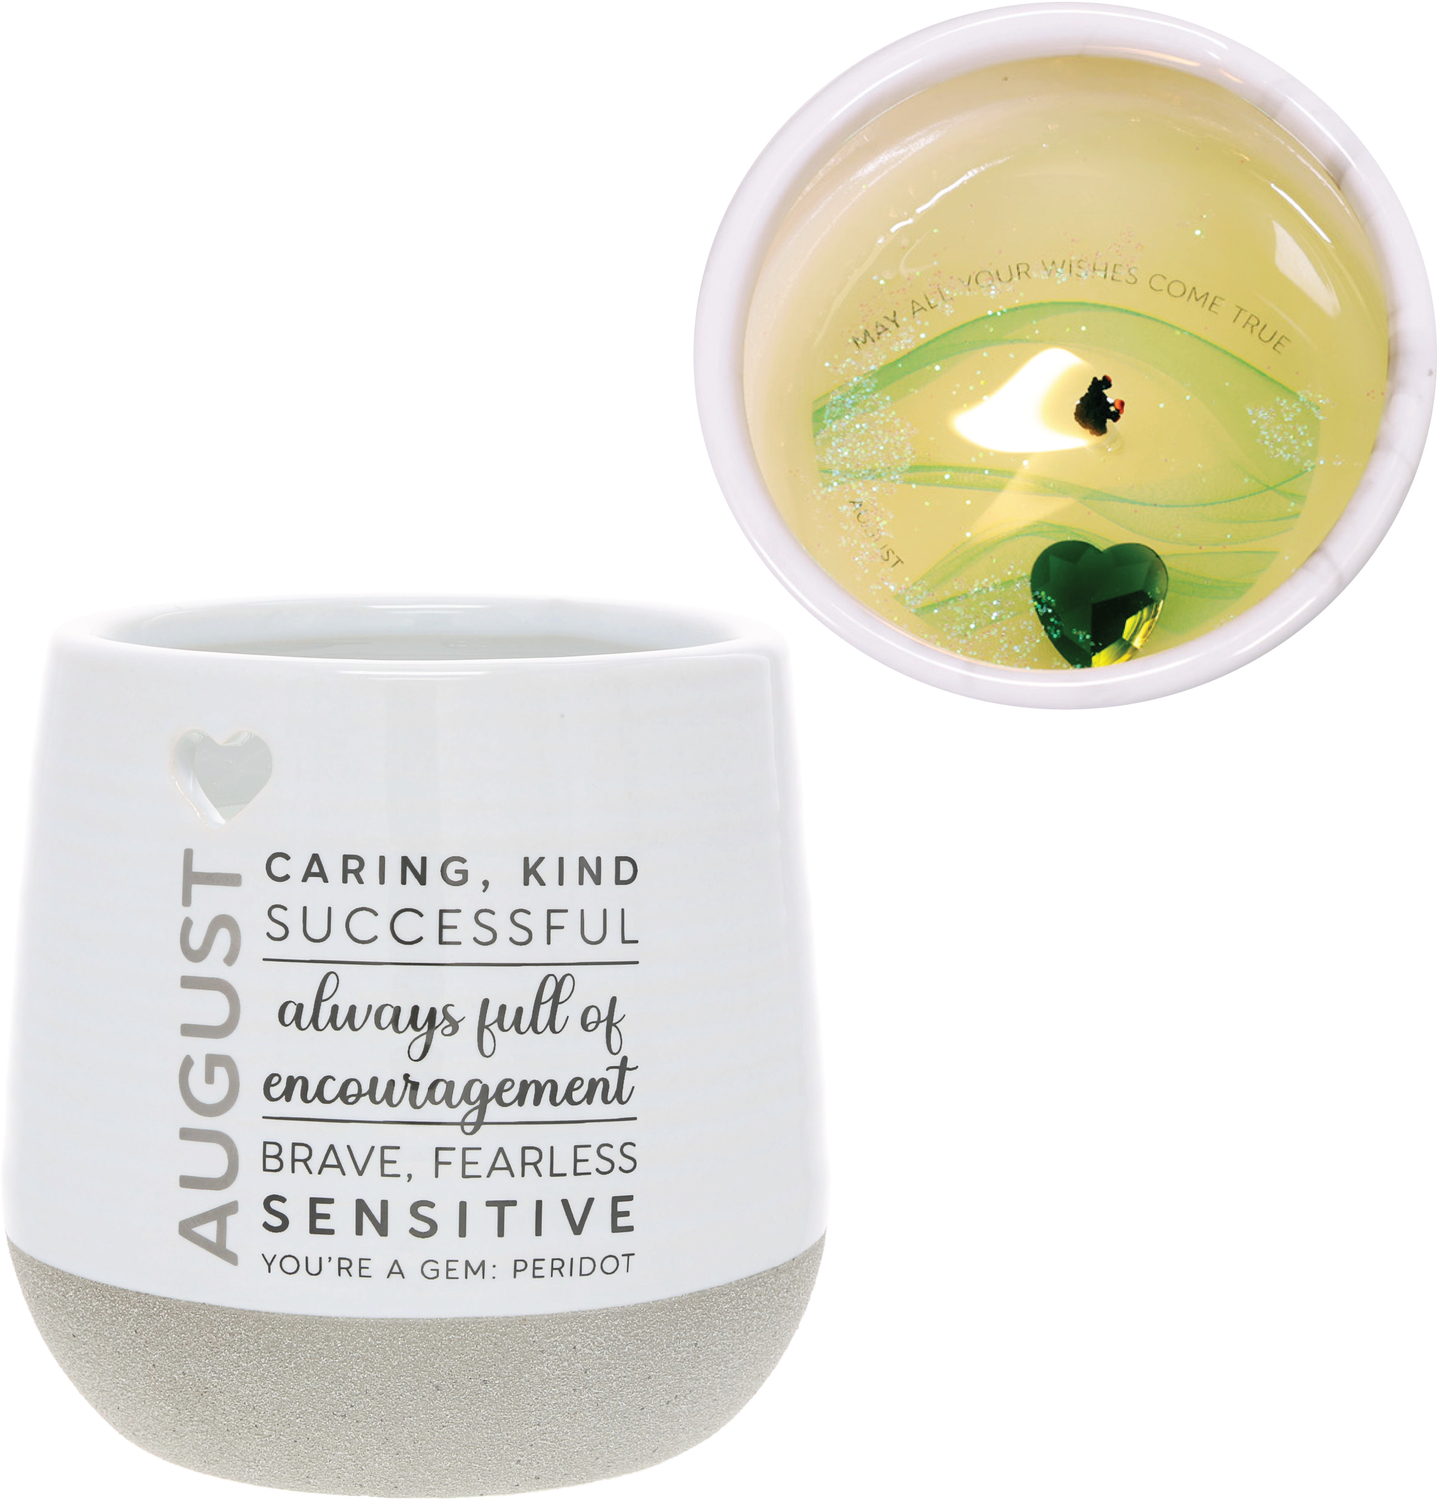 August by You Are a Gem - August - 11 oz - 100% Soy Wax Reveal Candle with Birthstone Scent: Tranquility